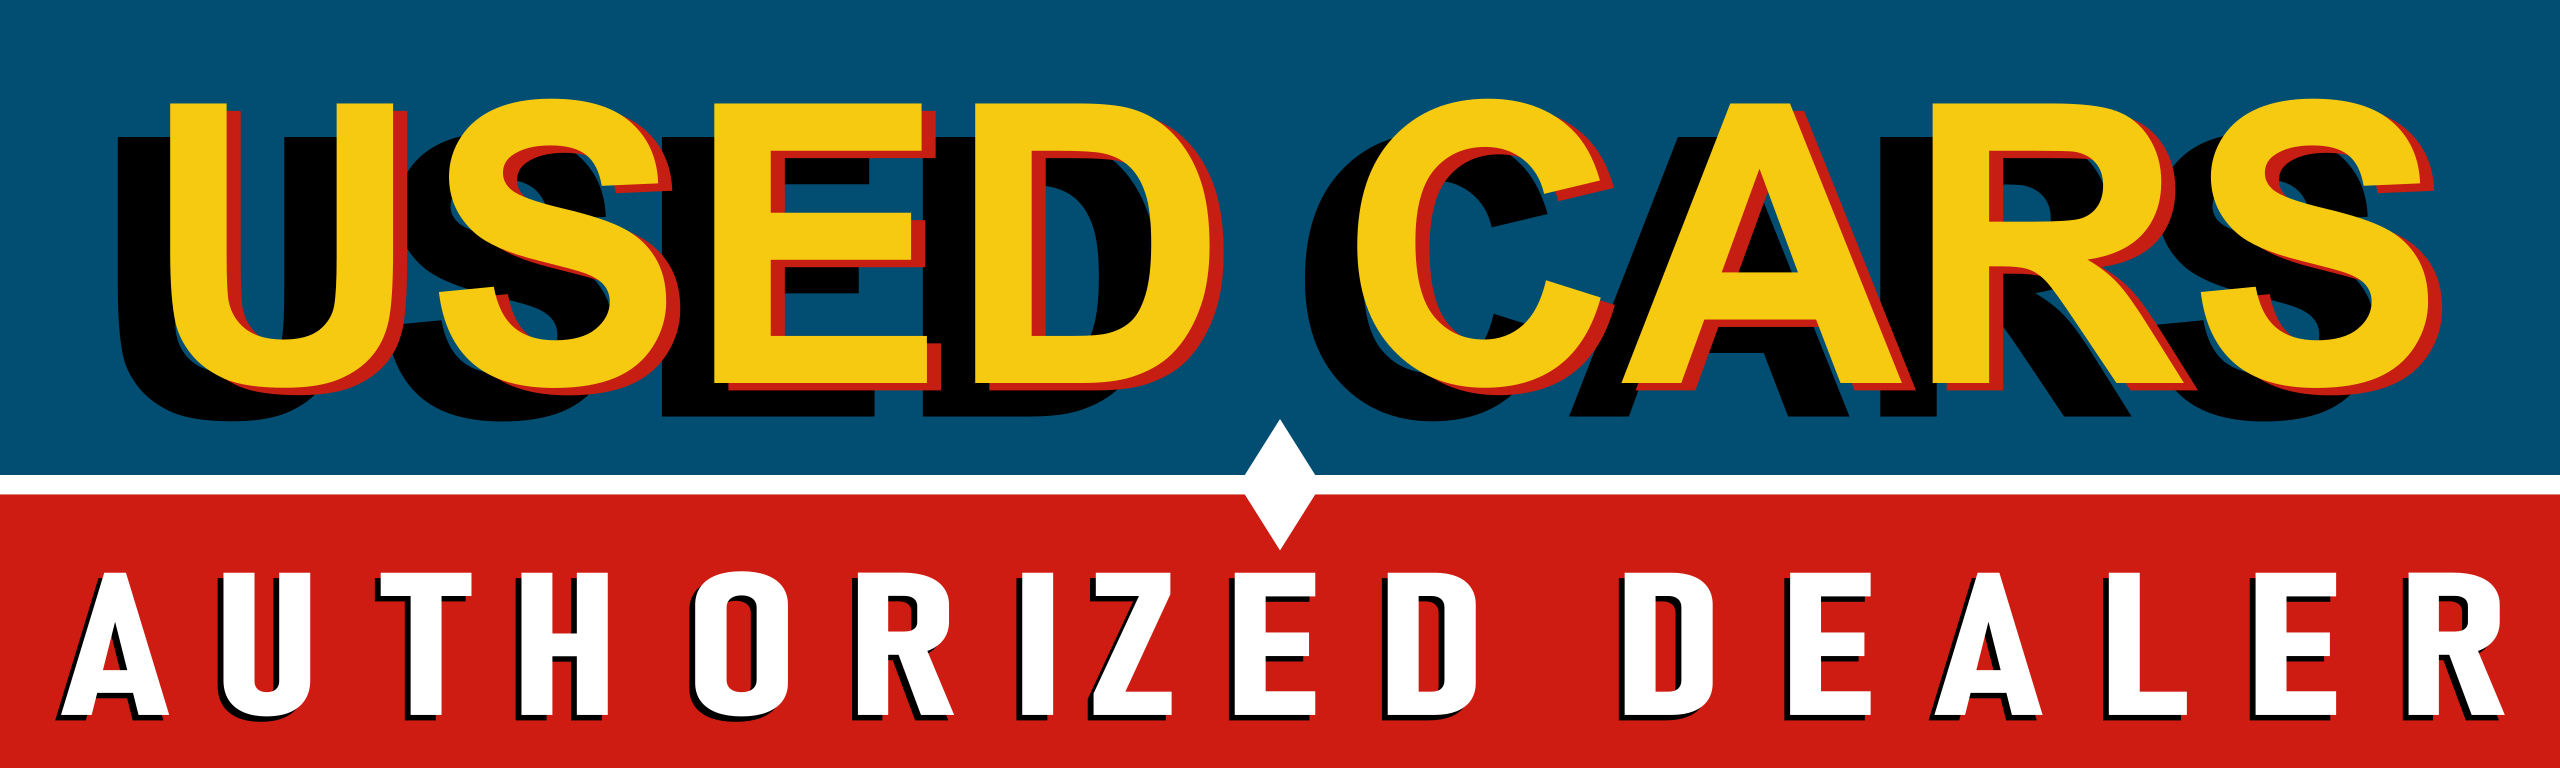 USED CARS AUTHORIZED DEALER BANNER 